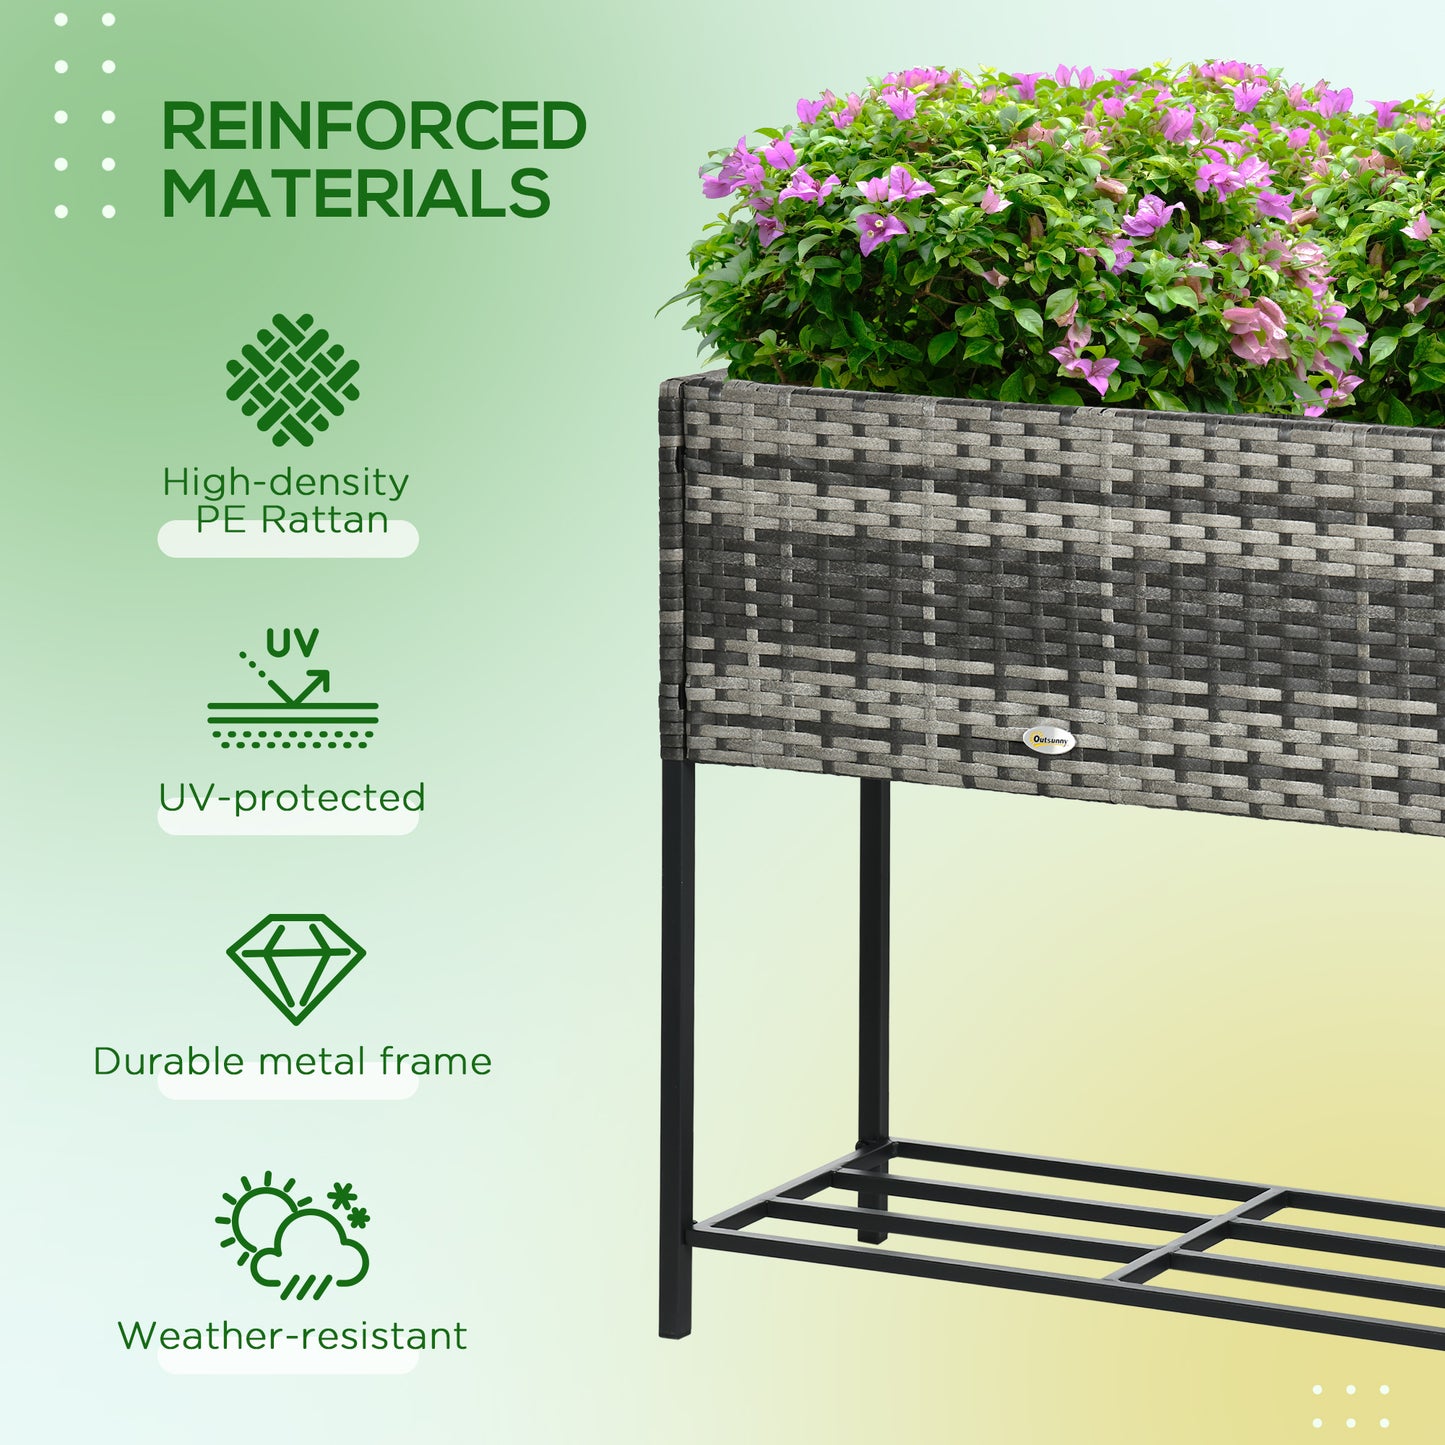 Rattan Raised Garden Boxes, Elevated Flower Beds with Storage Shelf for Herbs, Flowers, Vegetables, Mixed Grey